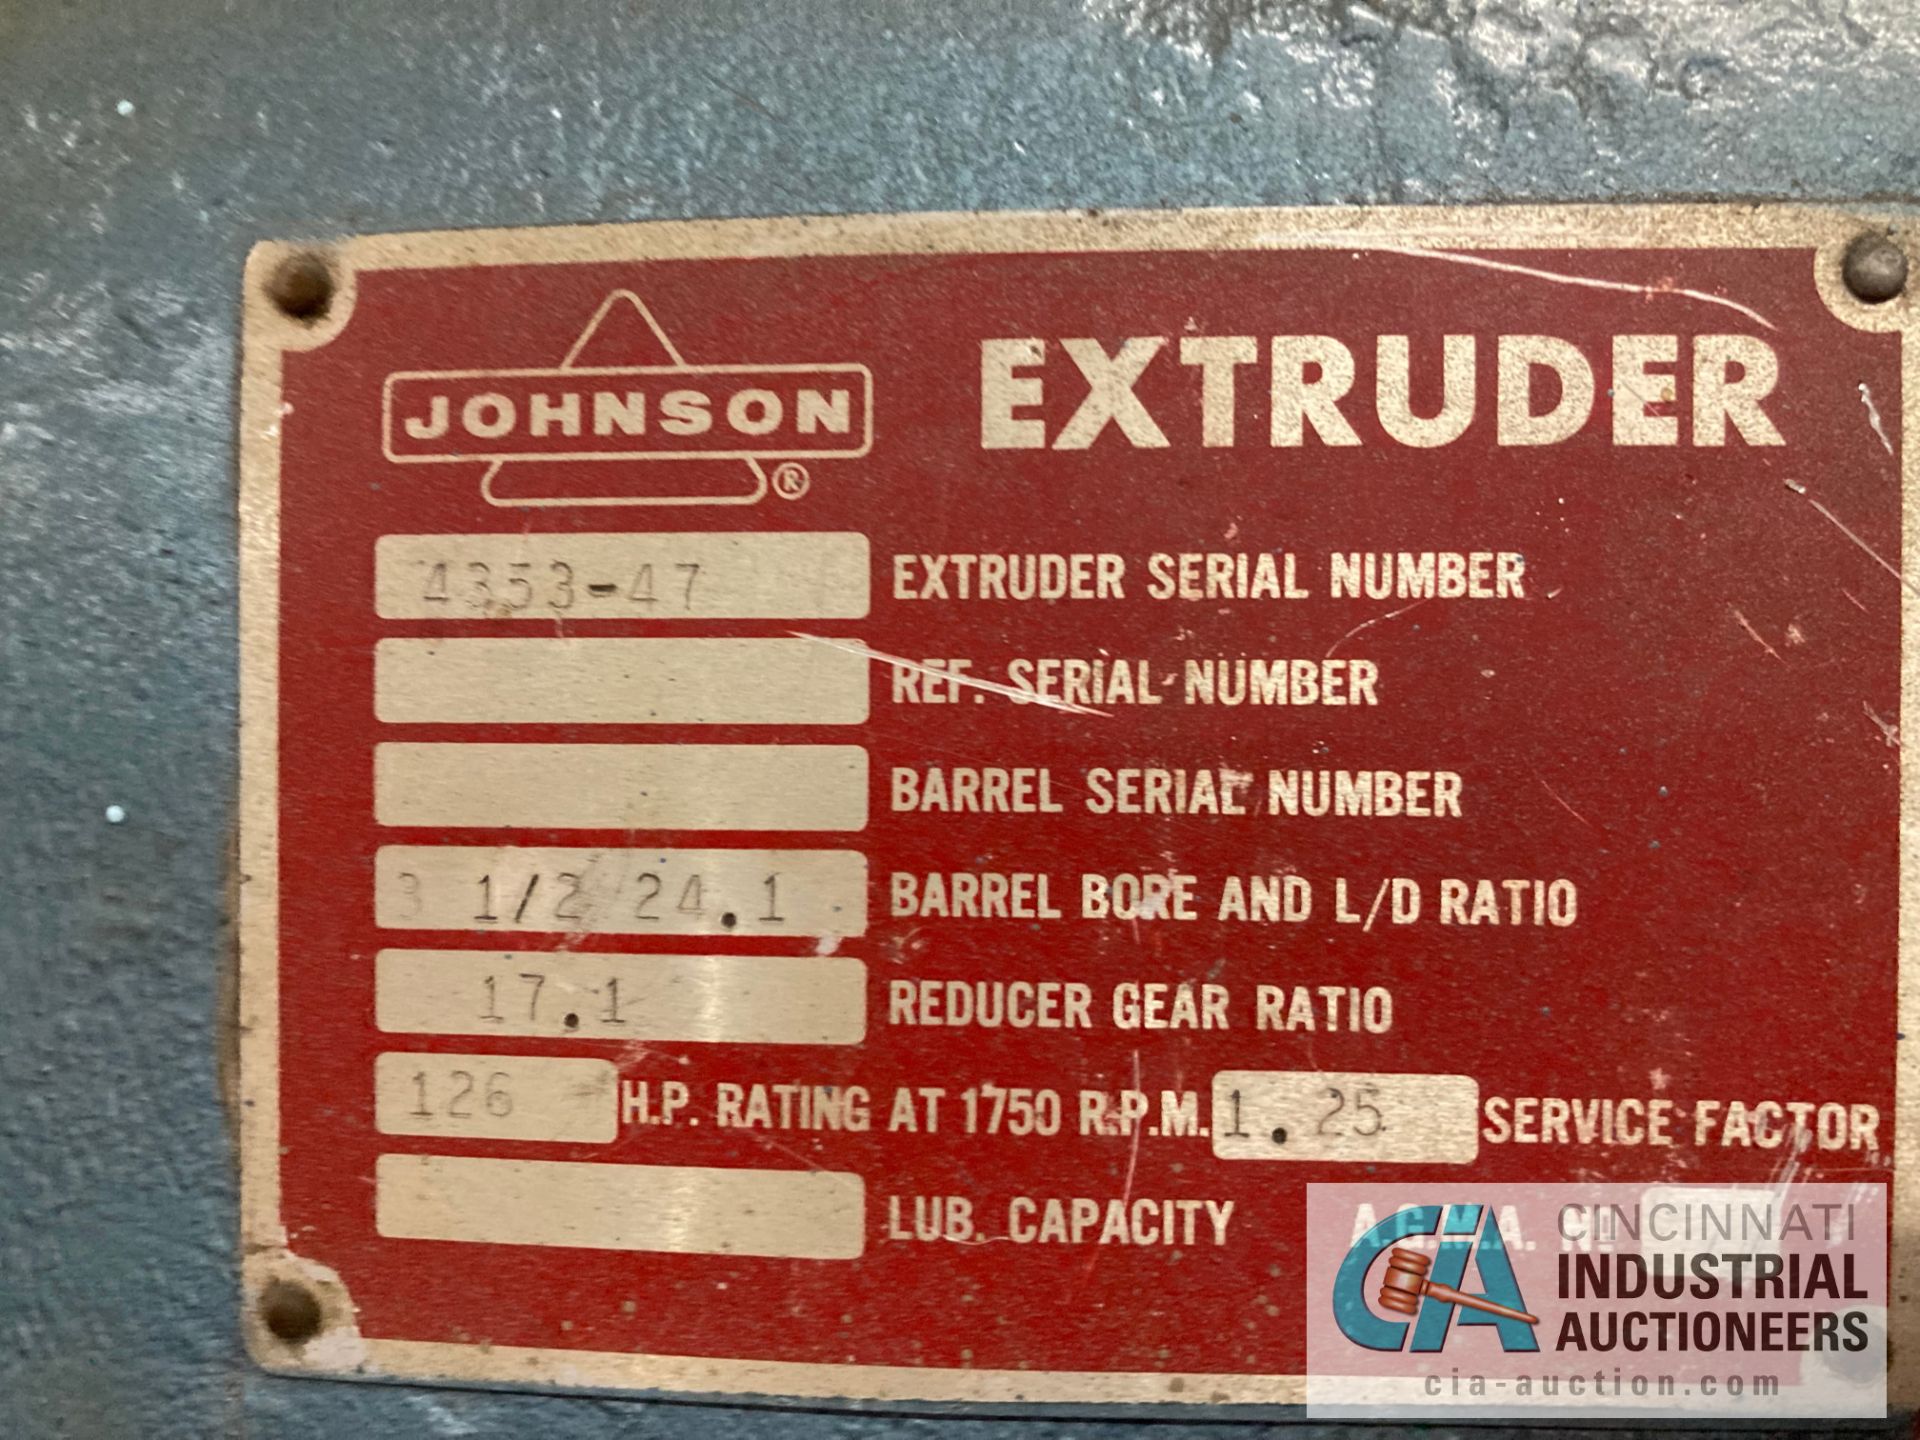 ****3.5" JOHNSON EXTRUDER; S/N 4353-47, 24.1 L/D VENTED BARREL, 17.1 GEARBOX RATIO, 126 HP MOTOR, - Image 4 of 10